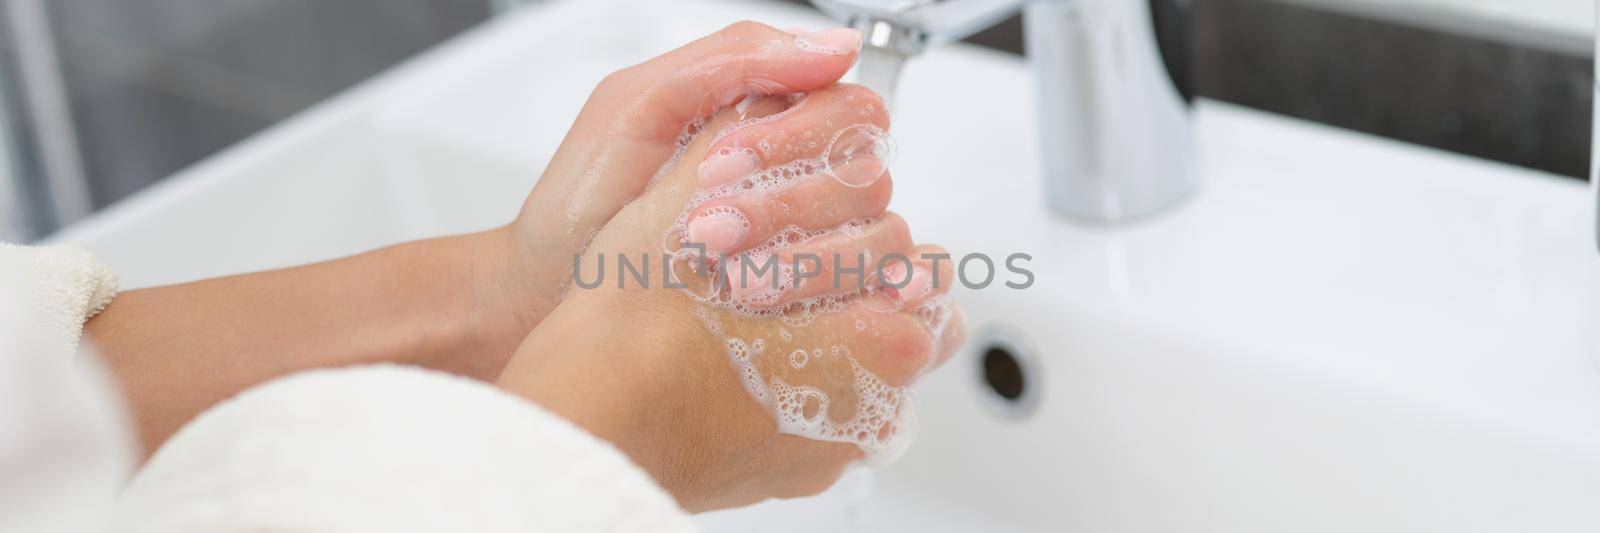 Woman washing her hands with soap, close-up by kuprevich